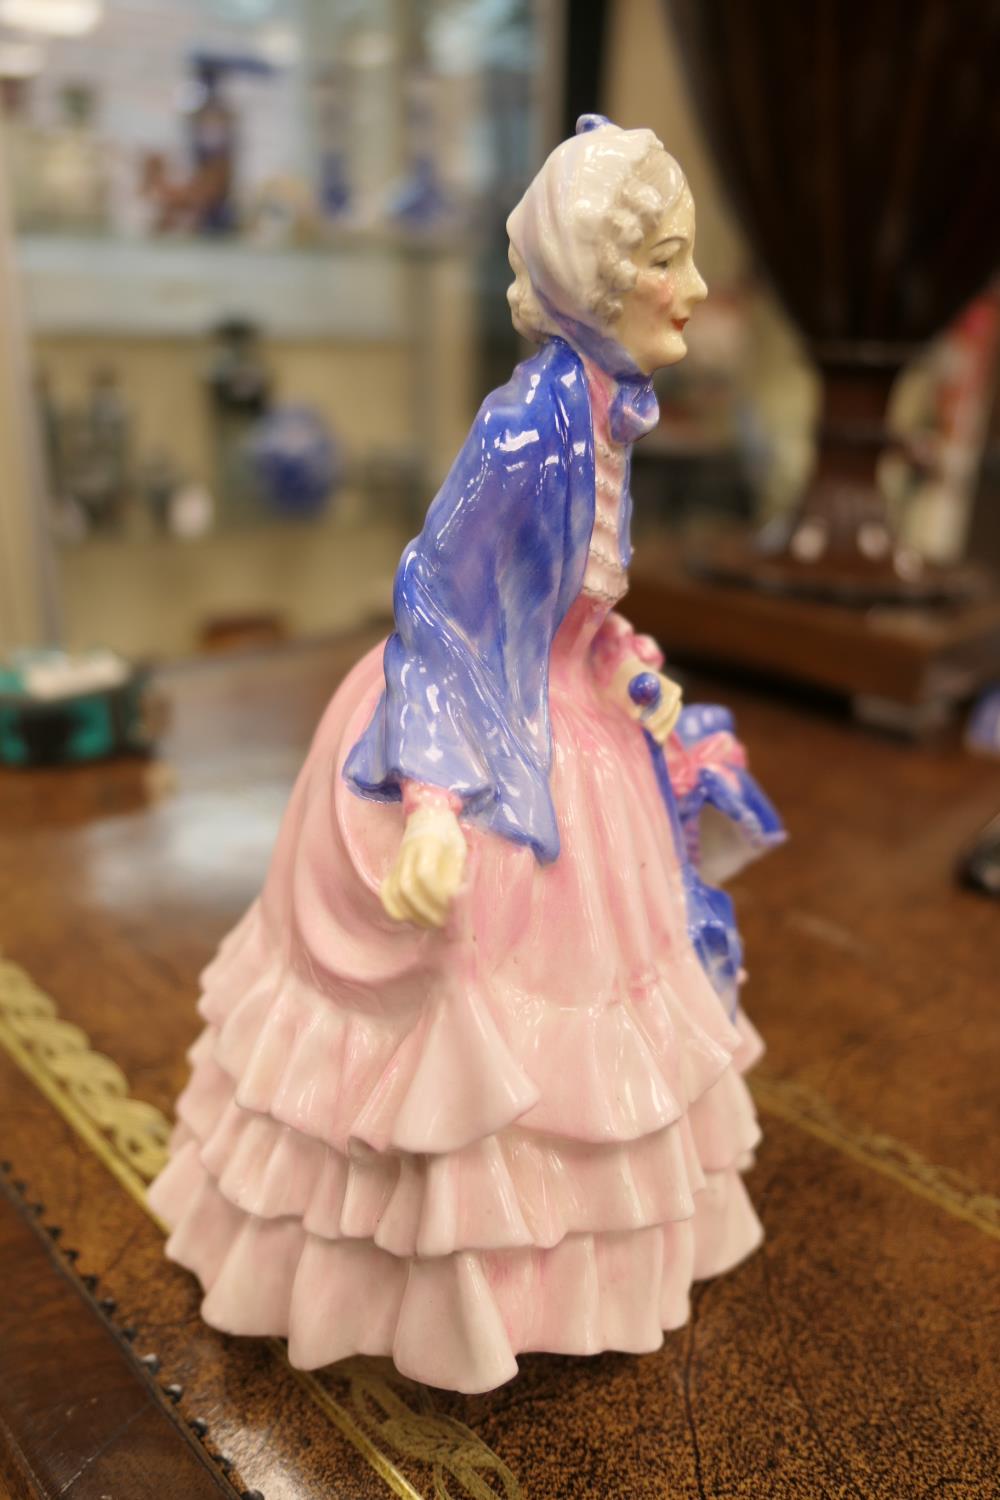 Royal Doulton china figure 'Gentle Woman', HN1632, designed by L Harradine, issued 1934-49, in a - Image 9 of 9